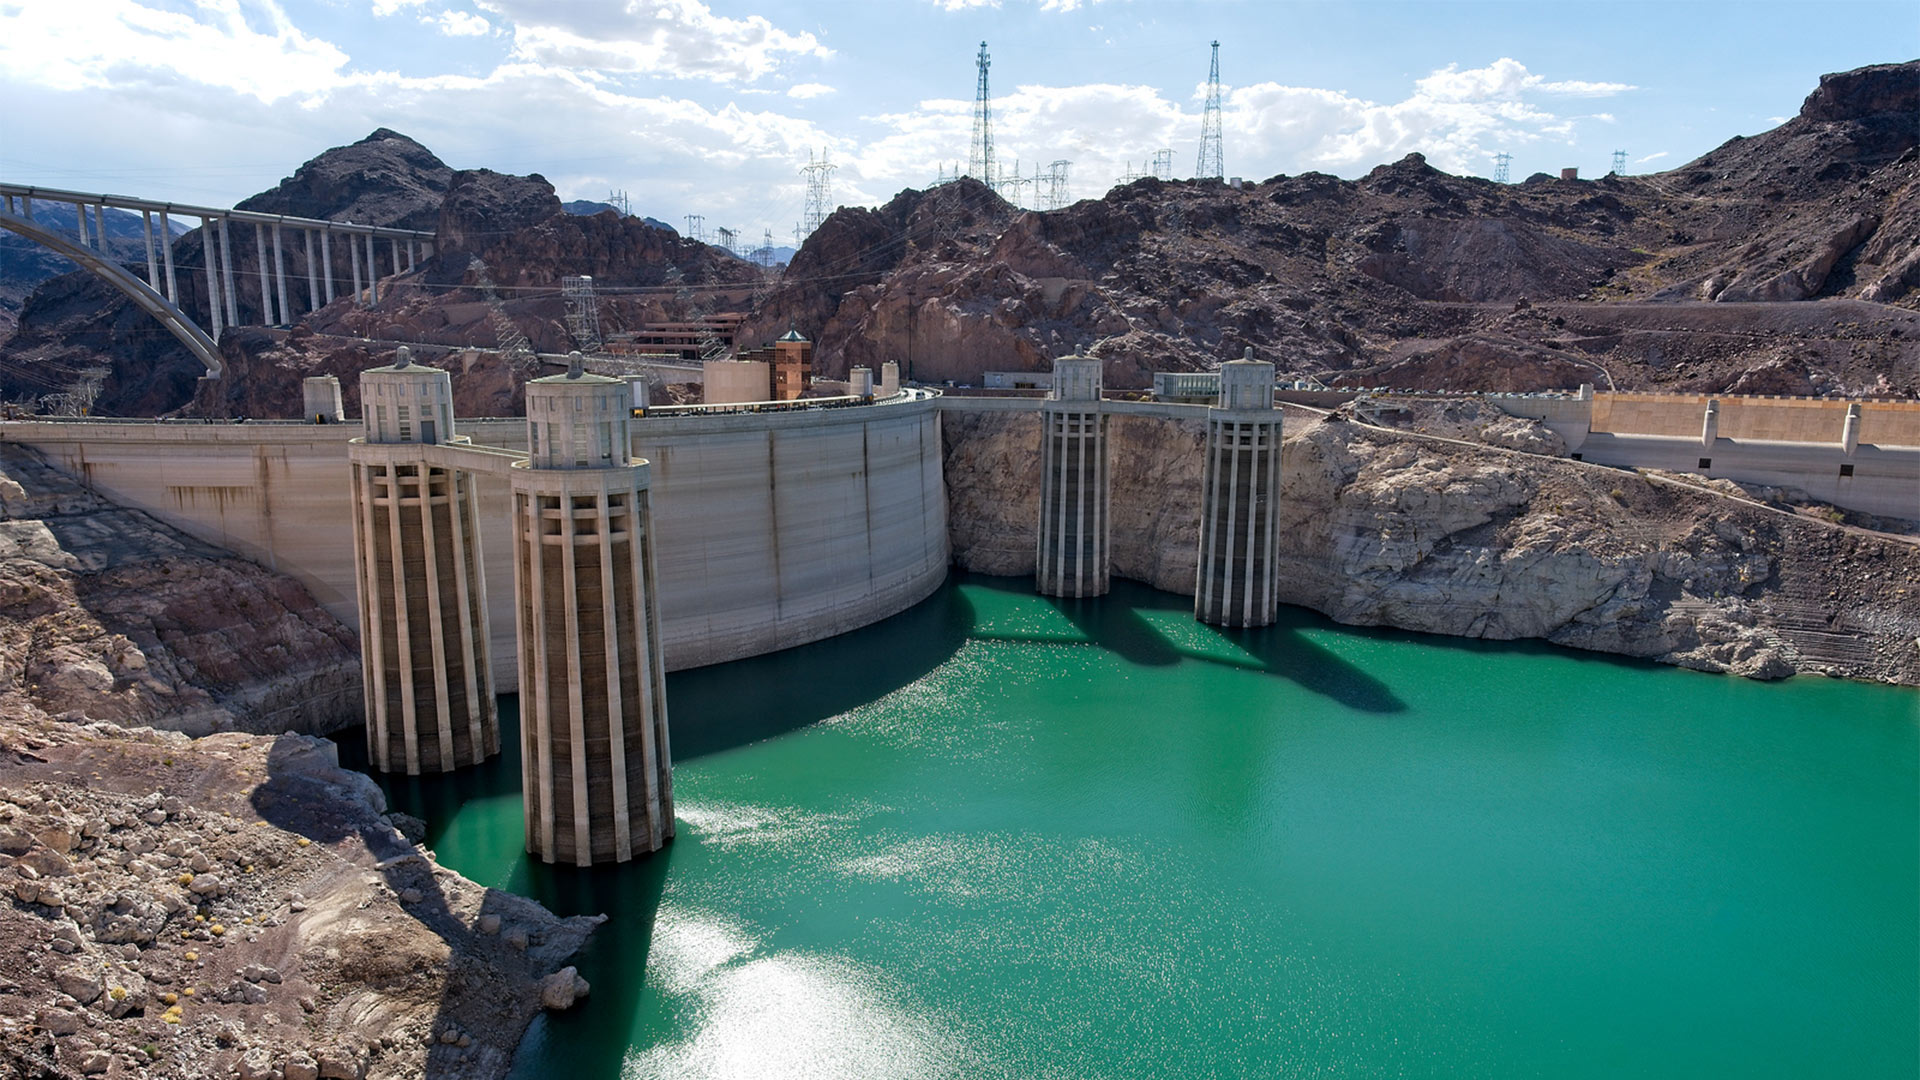 Six western states that rely on water from the Colorado River have agreed on a model to dramatically cut their use.